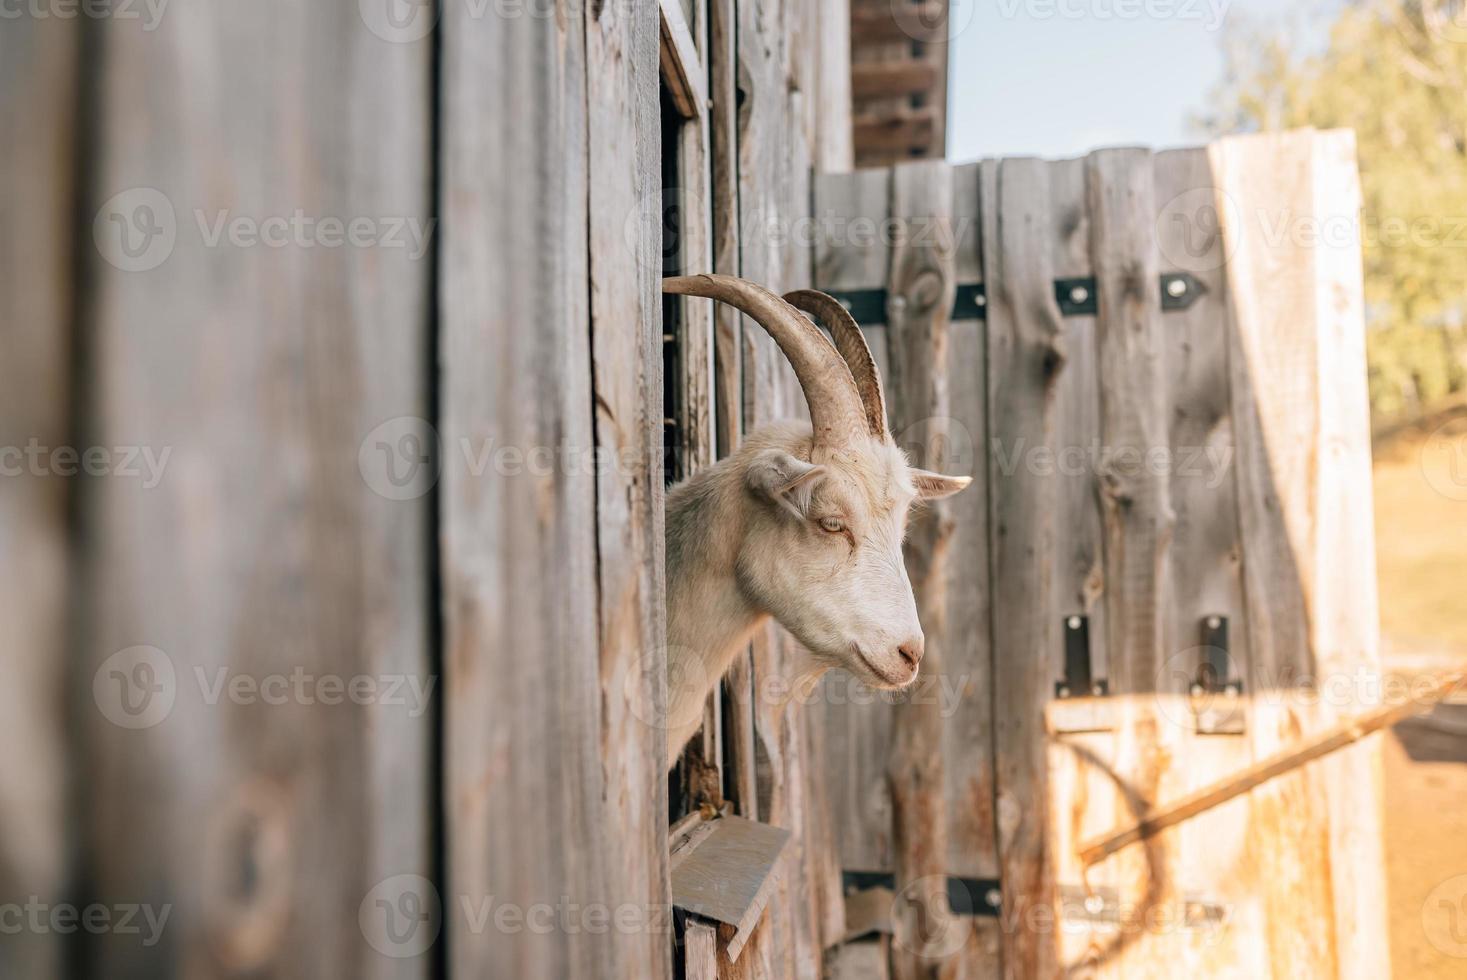 A curious goat poked its head out of the wooden pen photo